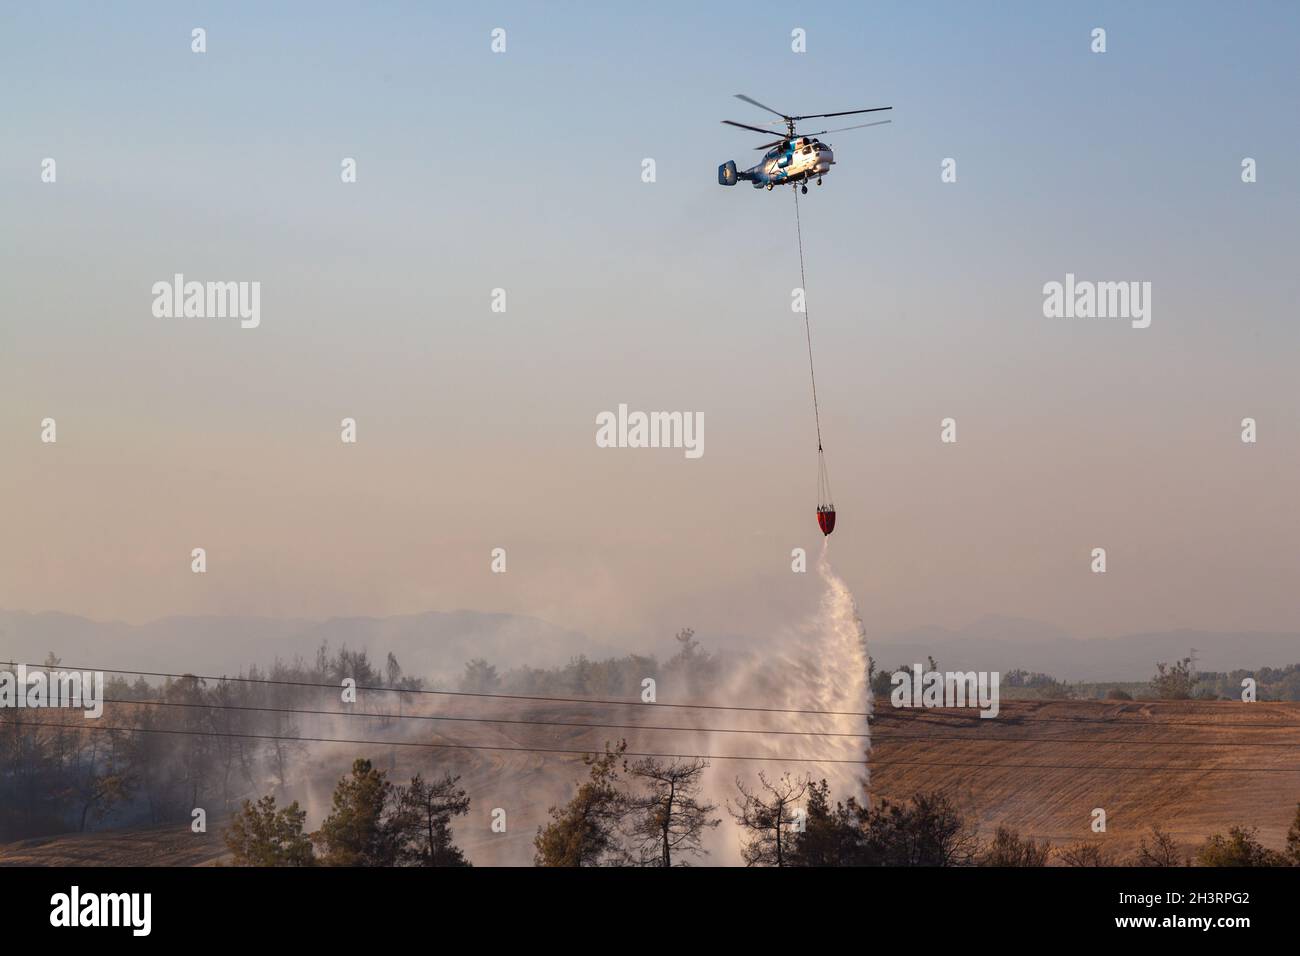 Wildfire helicopter pours water on fire. One of the most effective ways to fight forest fires. Stock Photo